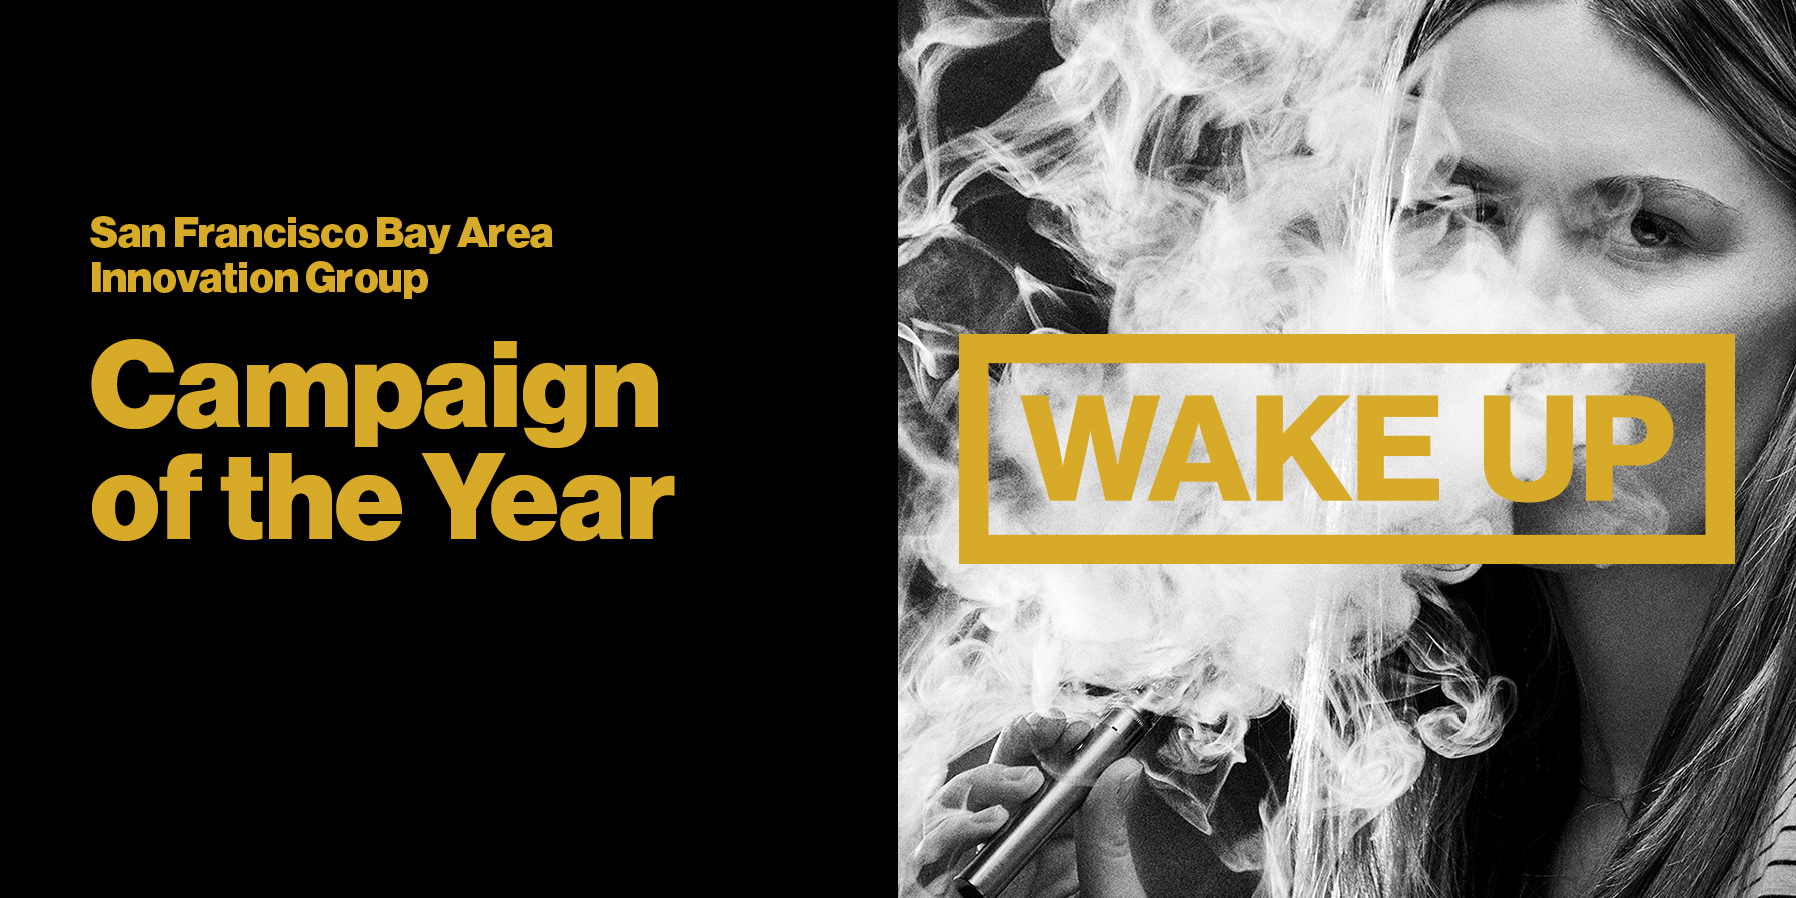 Campaign of the Year for “Wake Up”